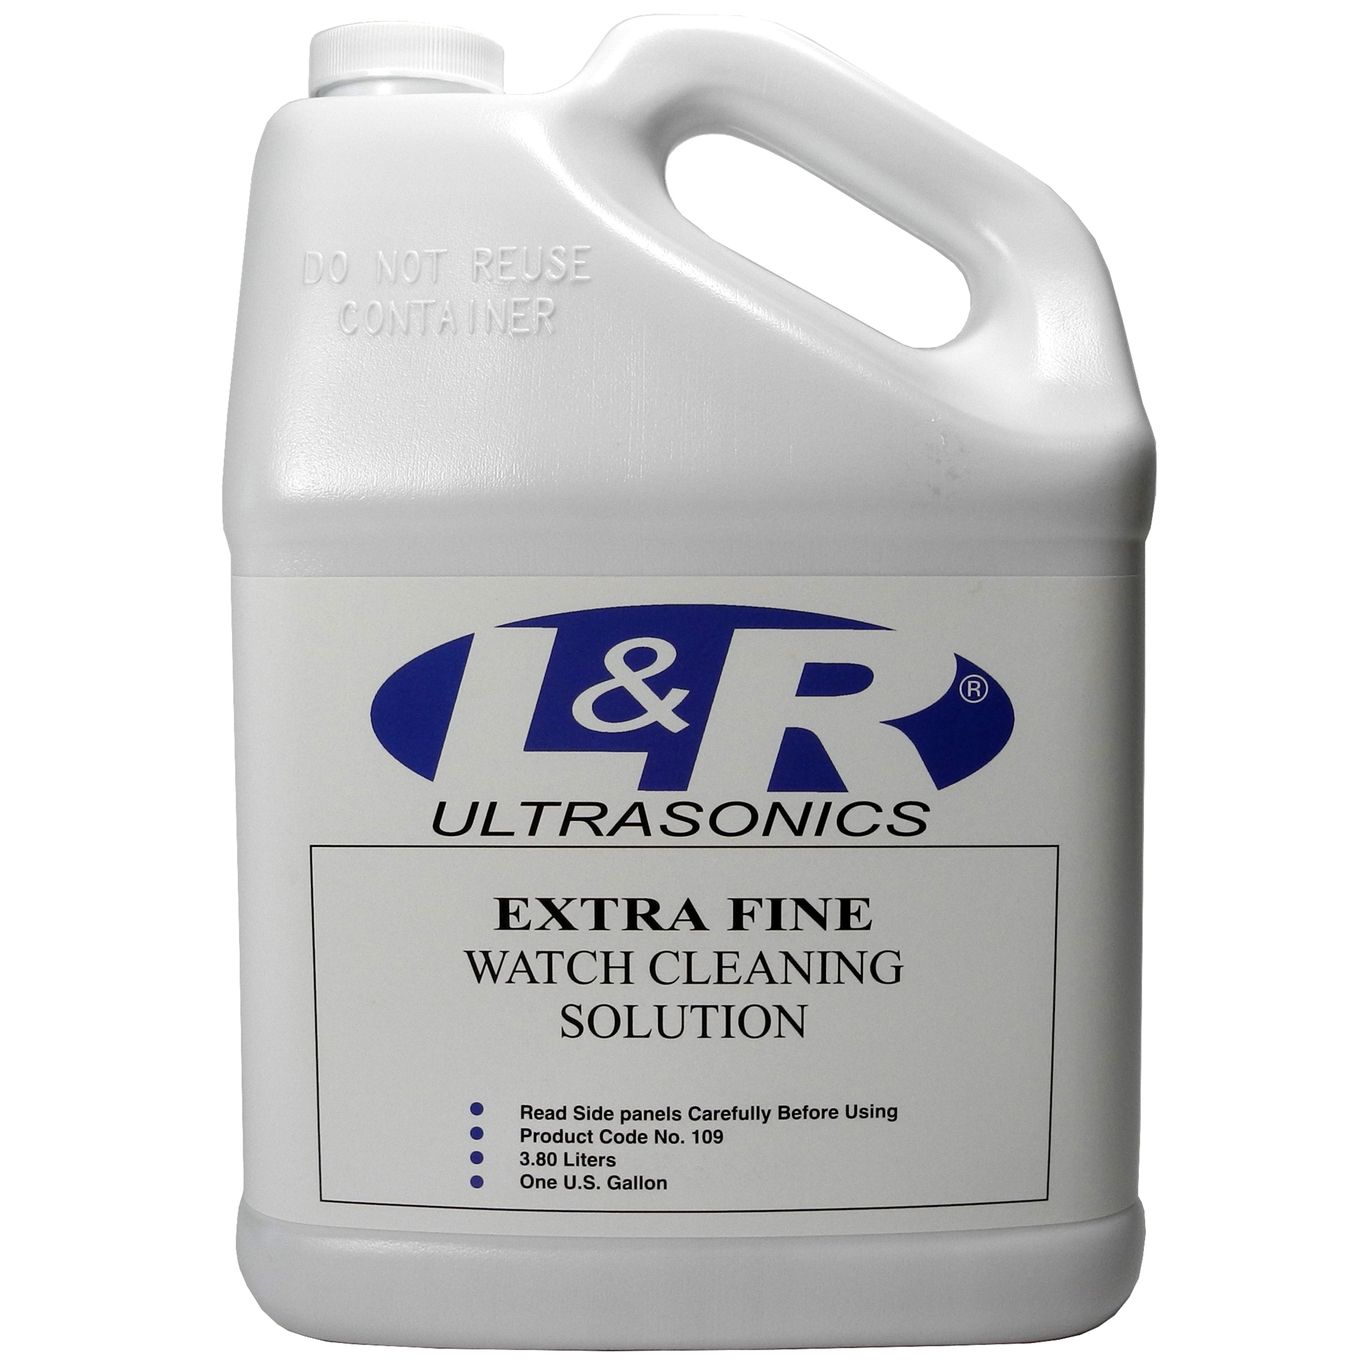 566 Non-Ammoniated Waterless Watch Cleaning Solution, L&R Manufacturing